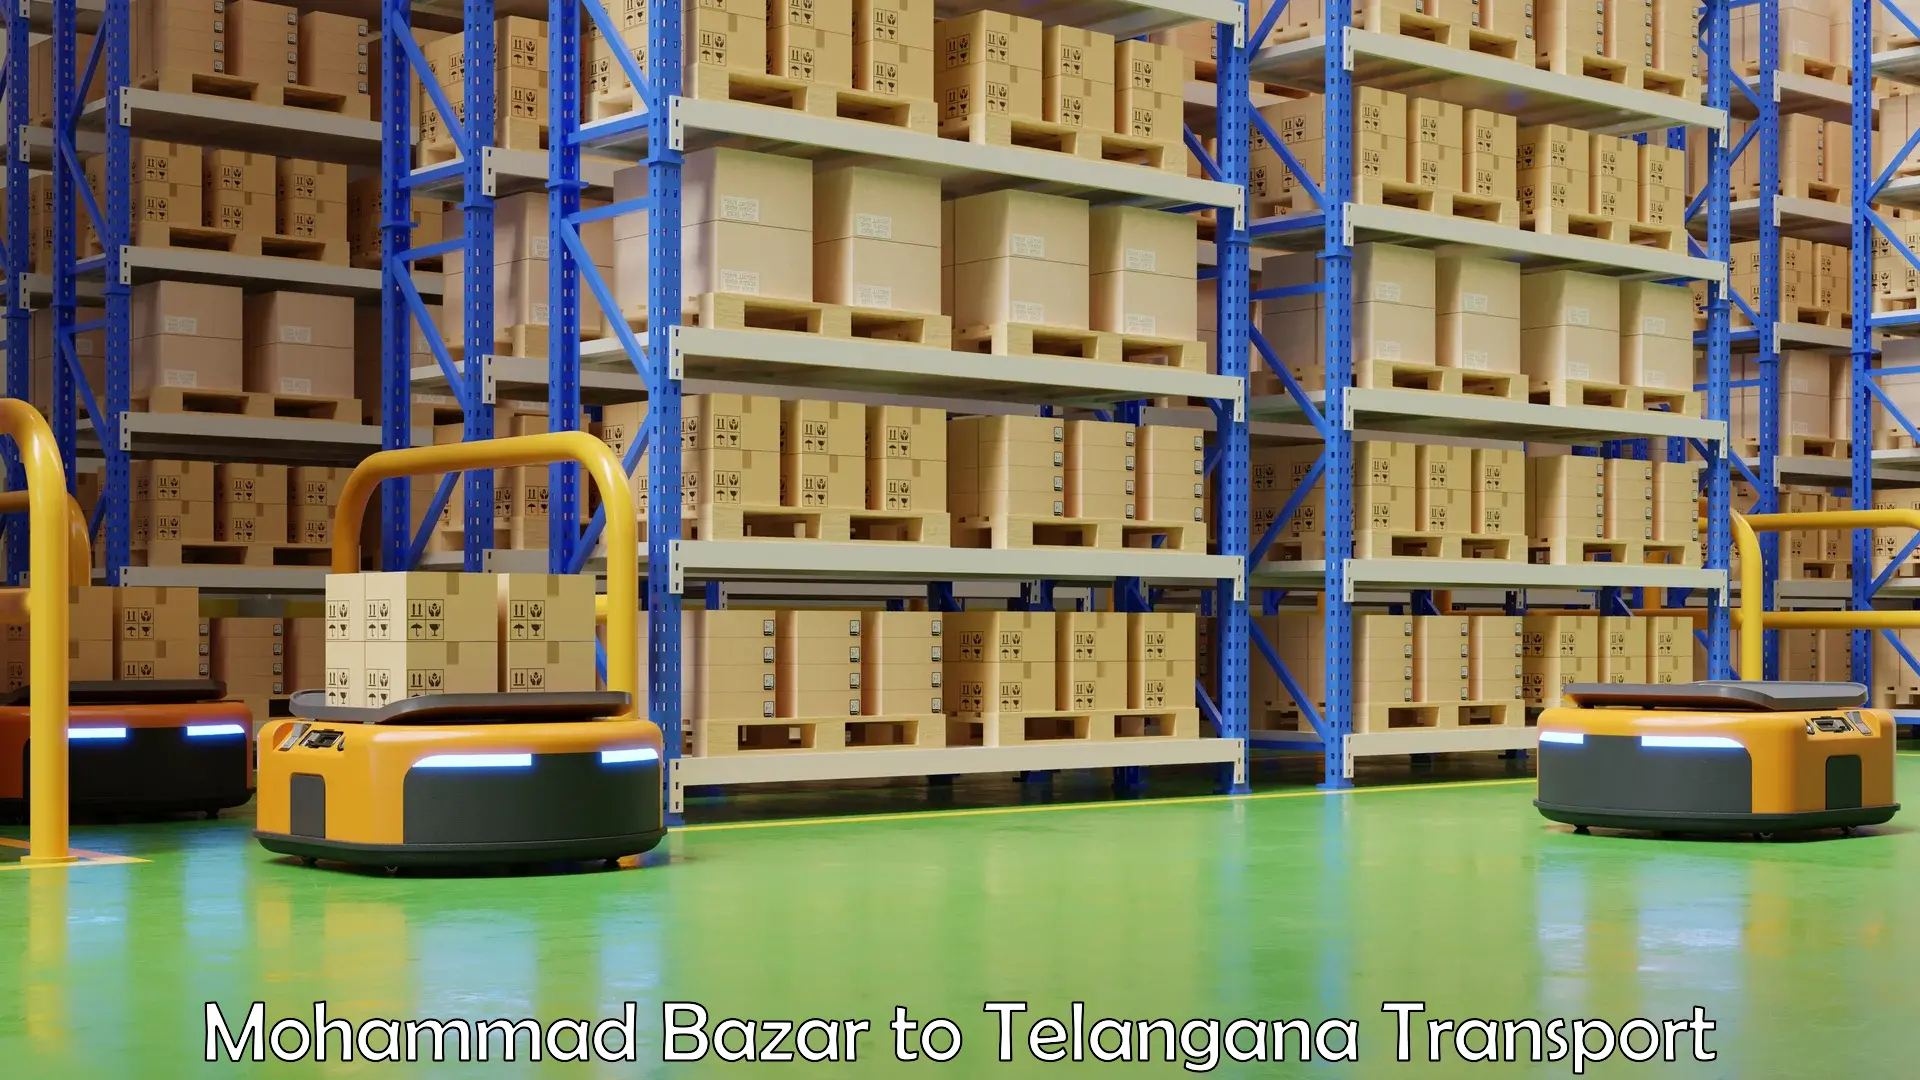 Air freight transport services Mohammad Bazar to Yellareddy